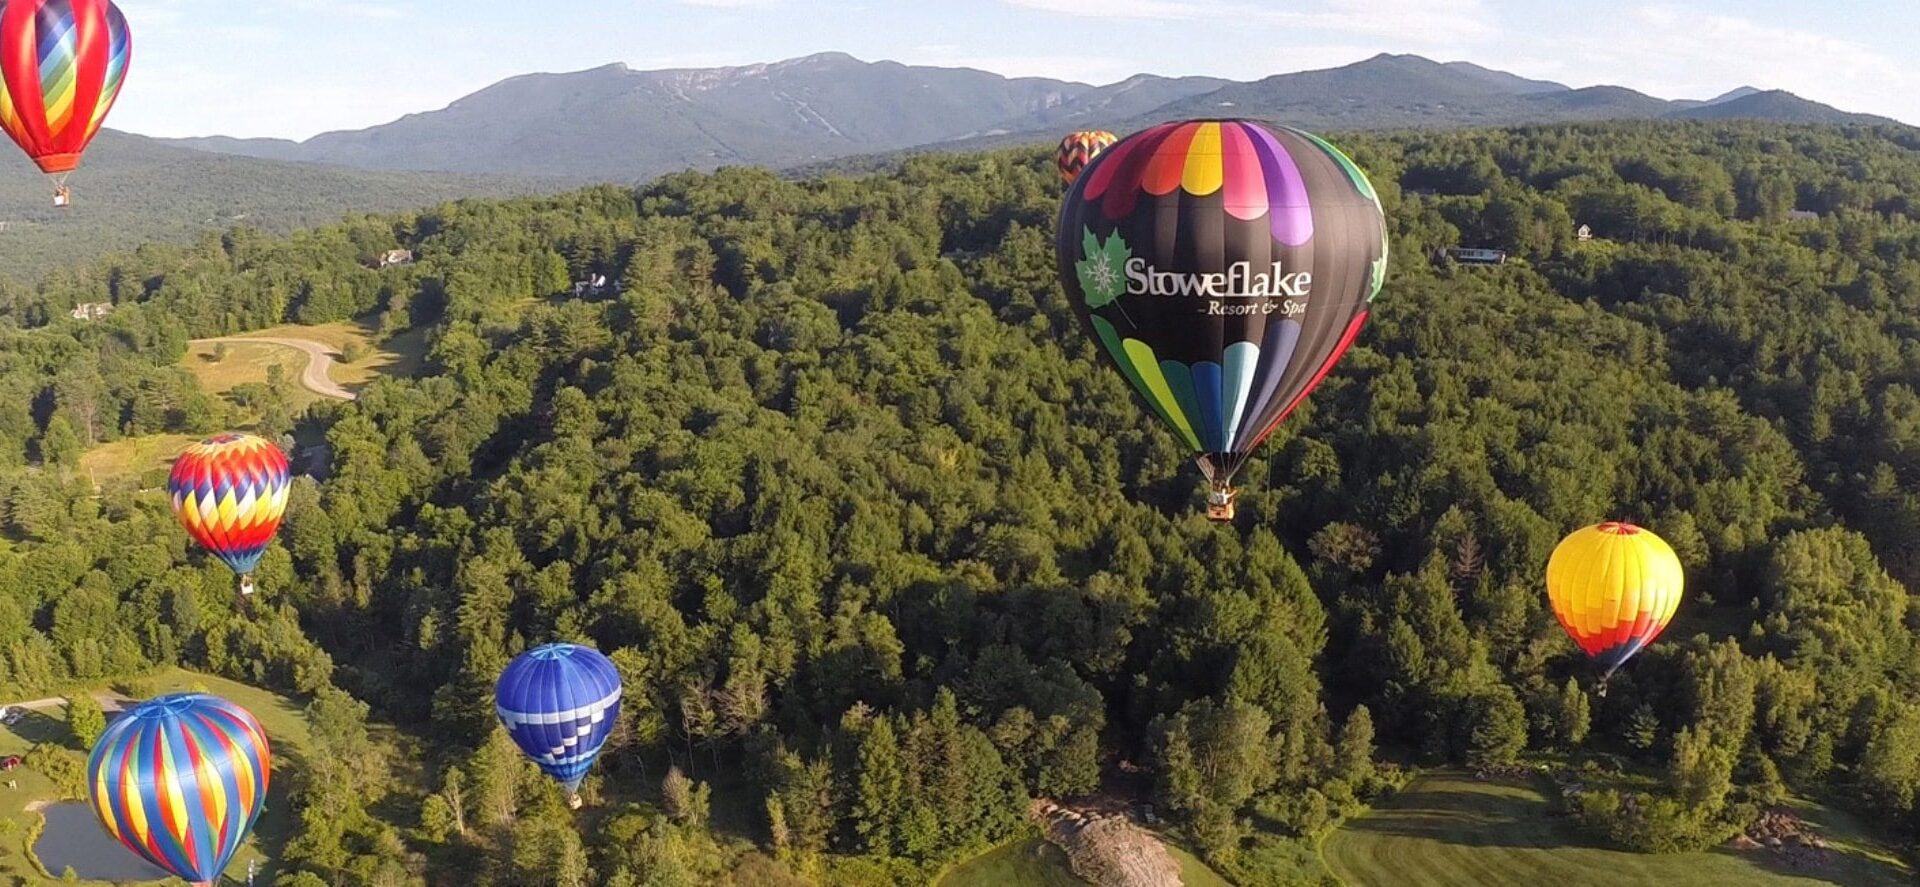 several colorful balloons in the air at the Stoweflake Hot Air Balloon Festival Stowe Vermont|several colorful hot air balloons rising off the ground